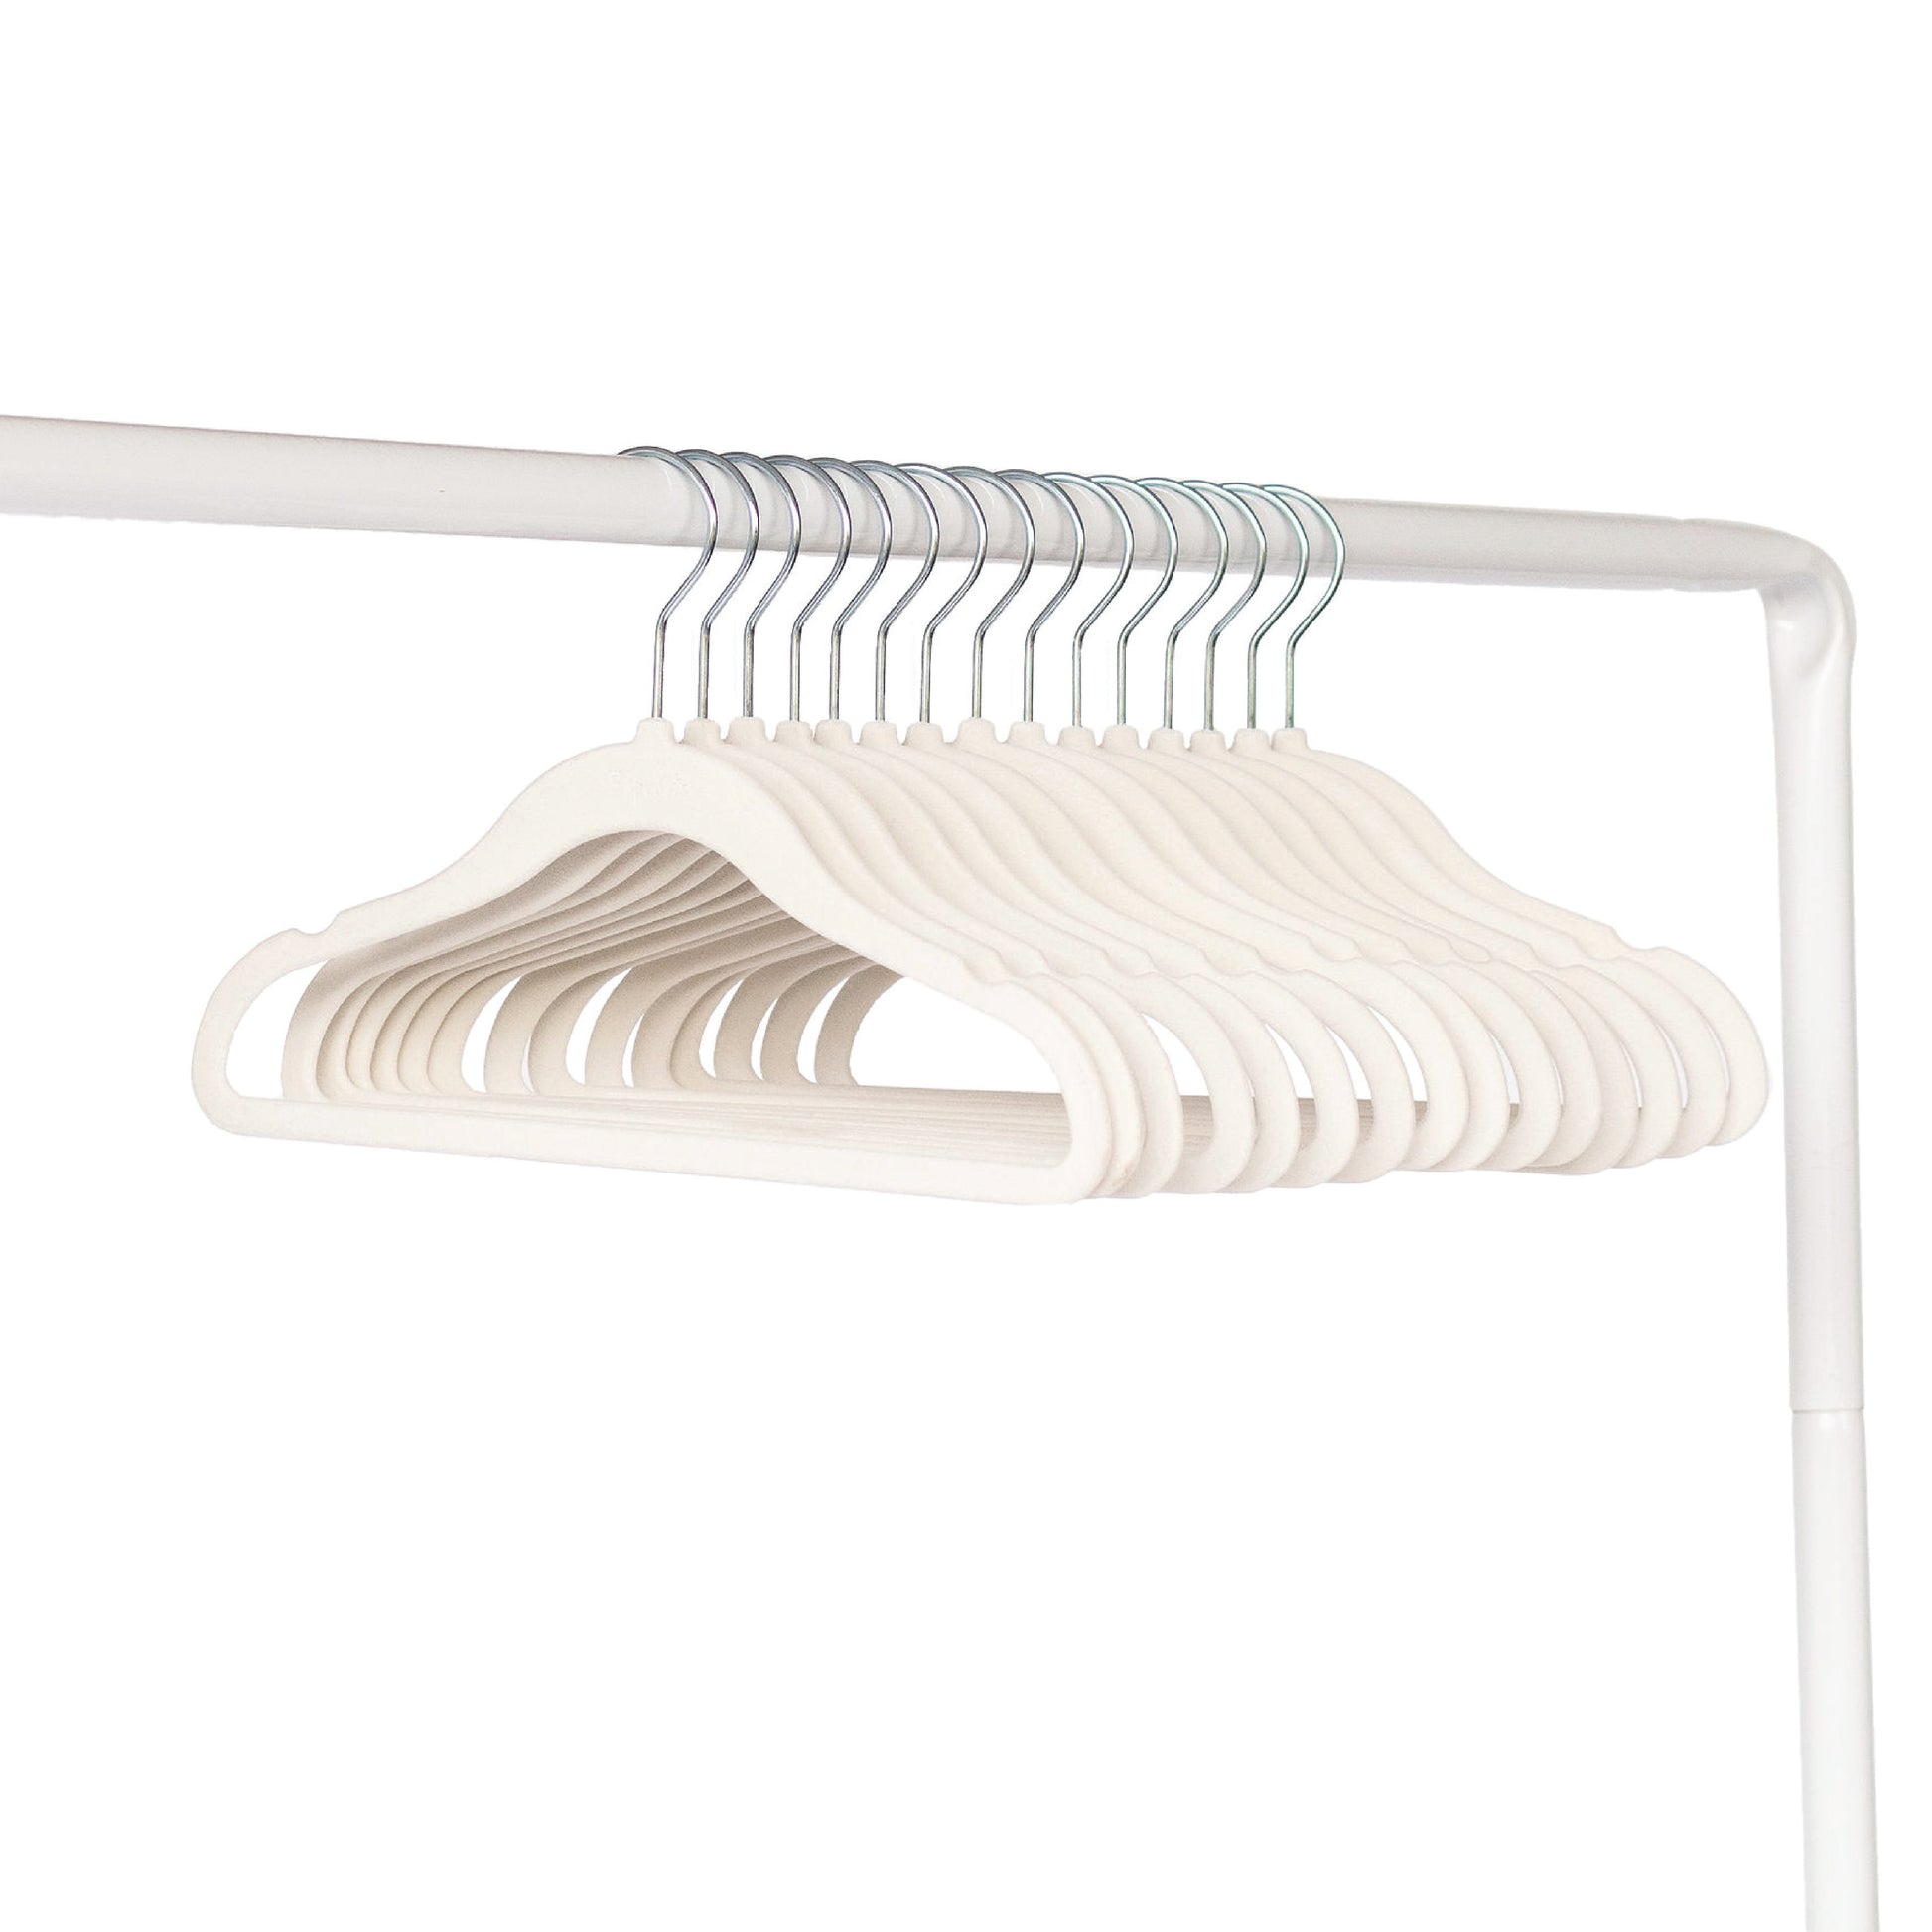 NIL PLASTIC Wooden Hanger for Clothes Hanging